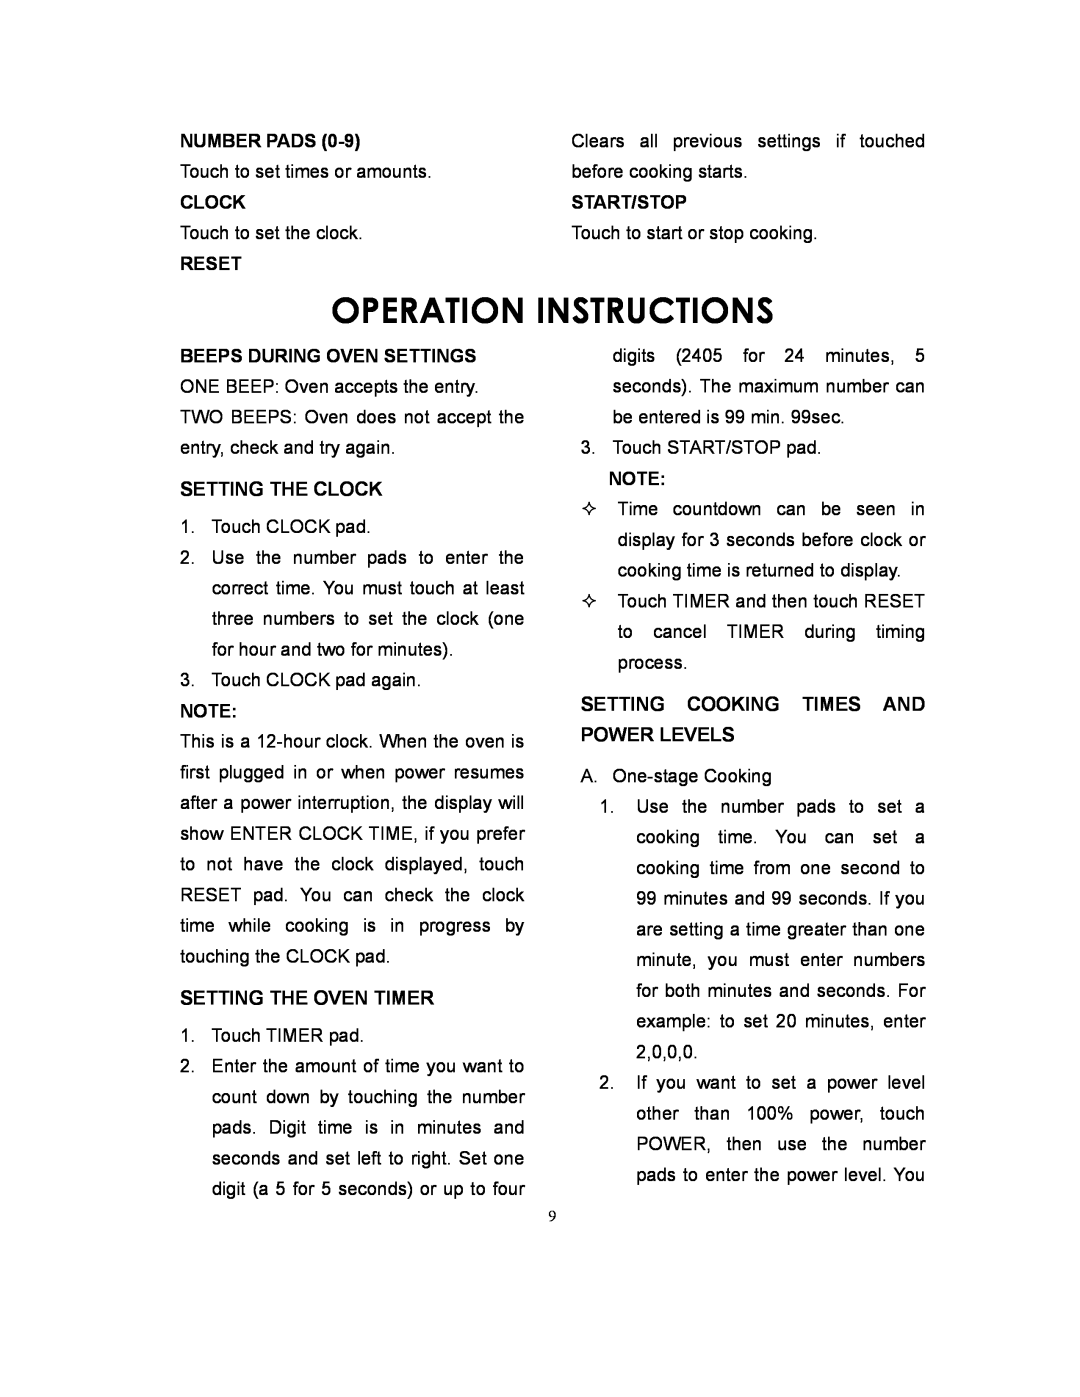 Sunbeam SMW729 Operation Instructions, Setting The Clock, Setting The Oven Timer, Setting Cooking Times And Power Levels 